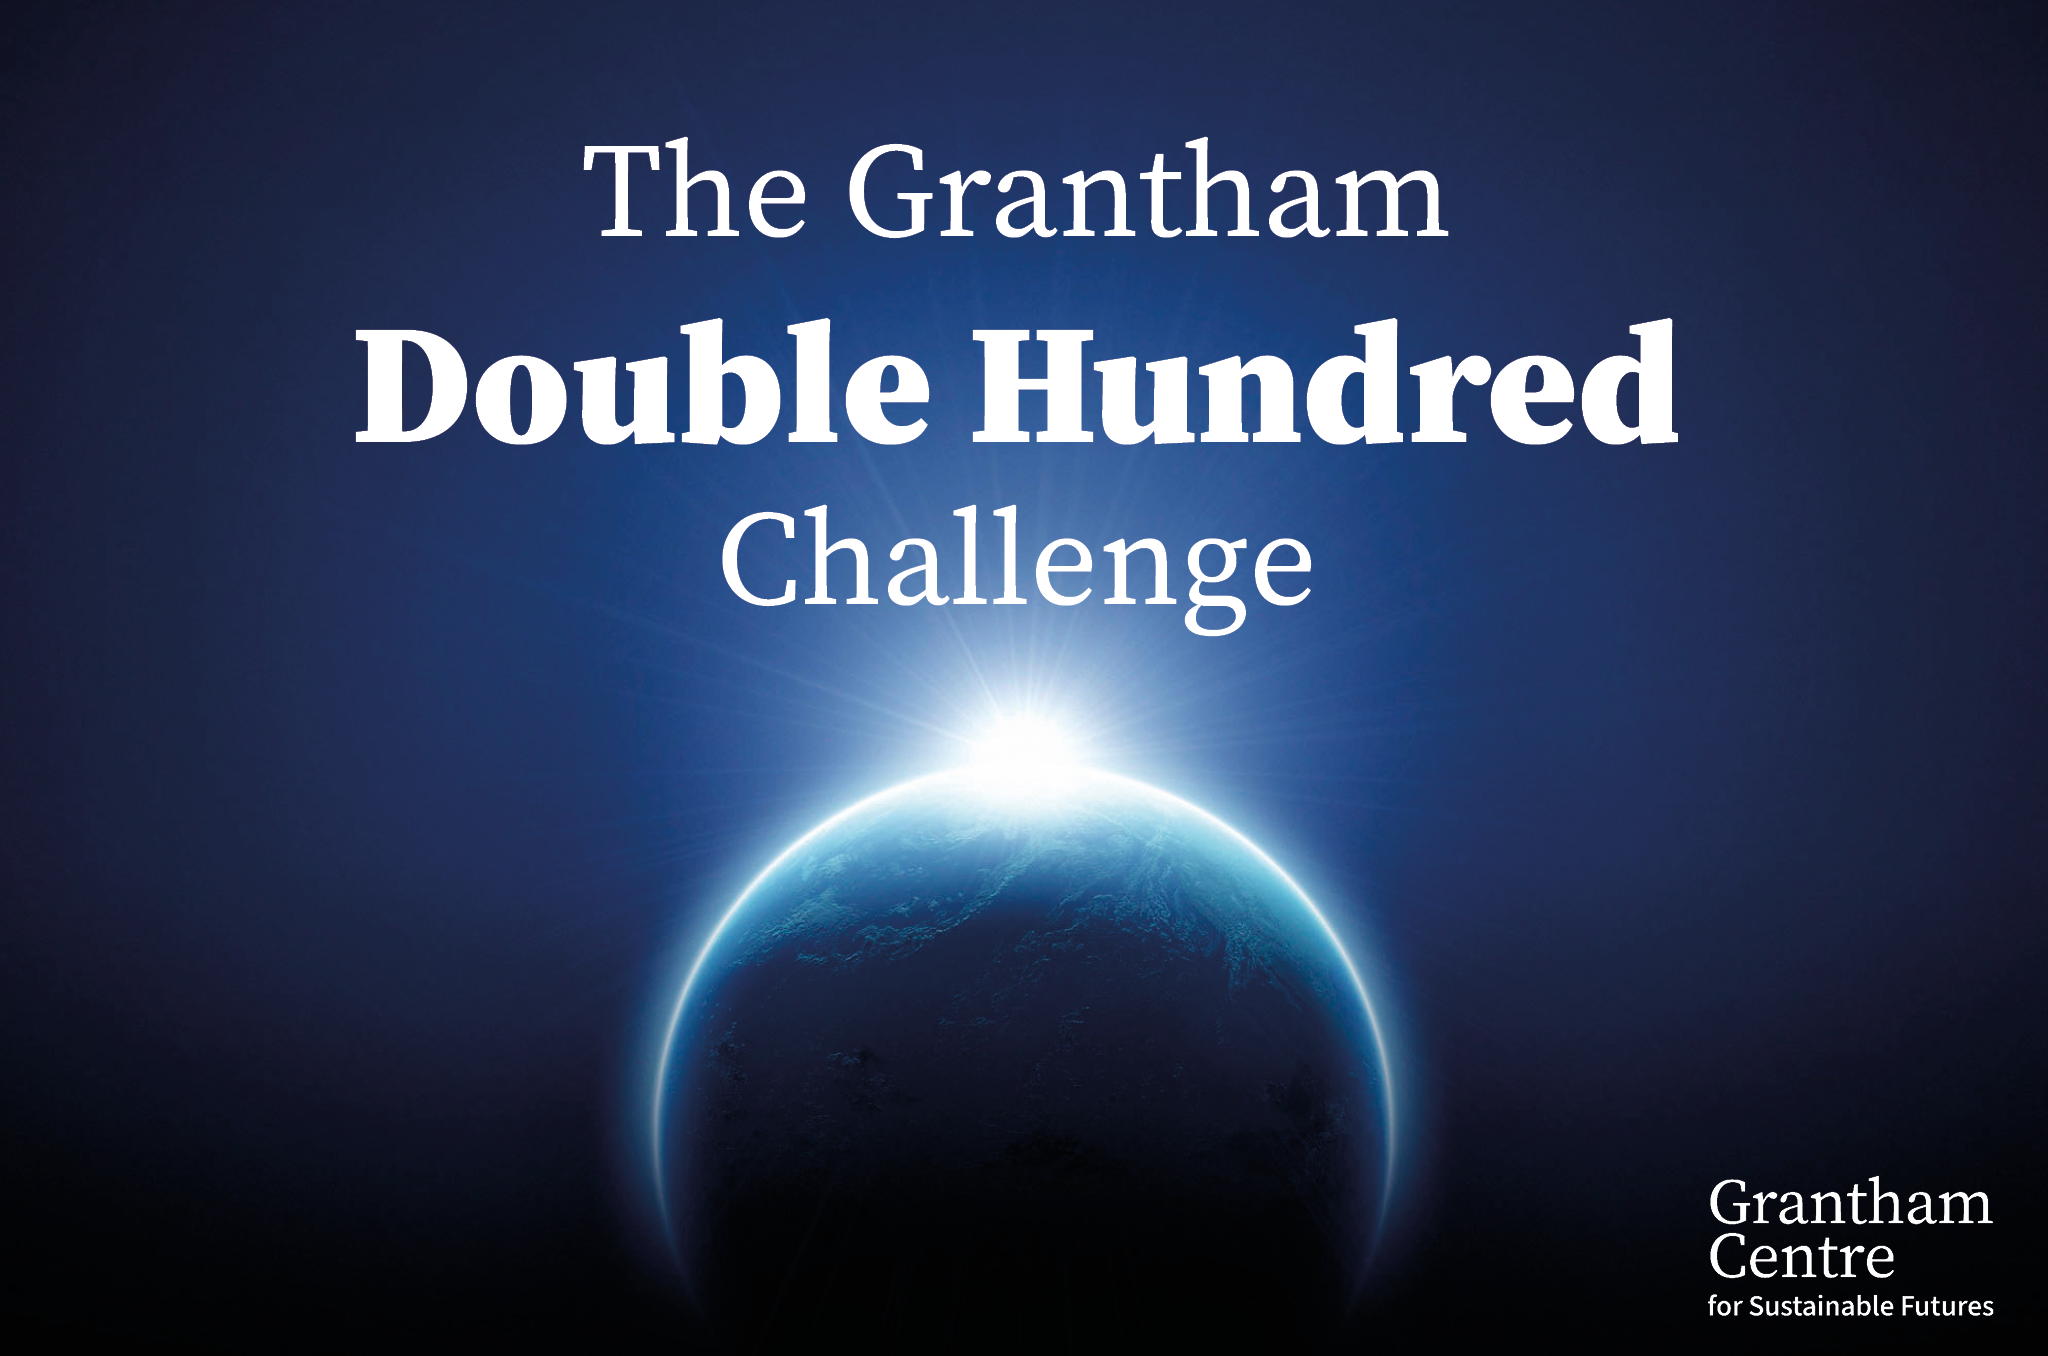 The Grantham Double Hundred Challenge: a research funding opportunity